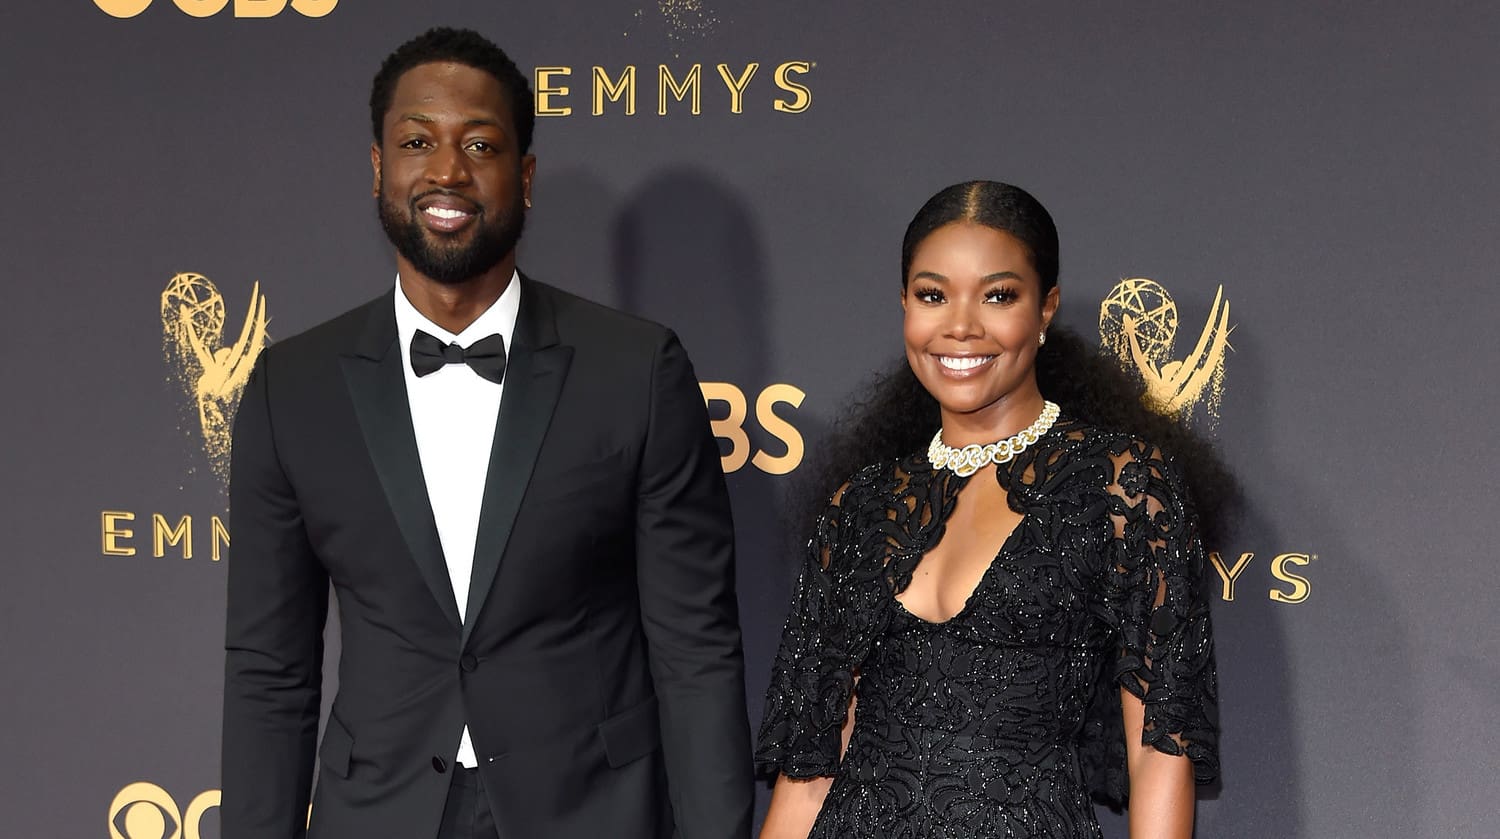 Gabrielle Union's Latest Photo With Her Smiling Baby Girl Has Fans In Awe - See It Here